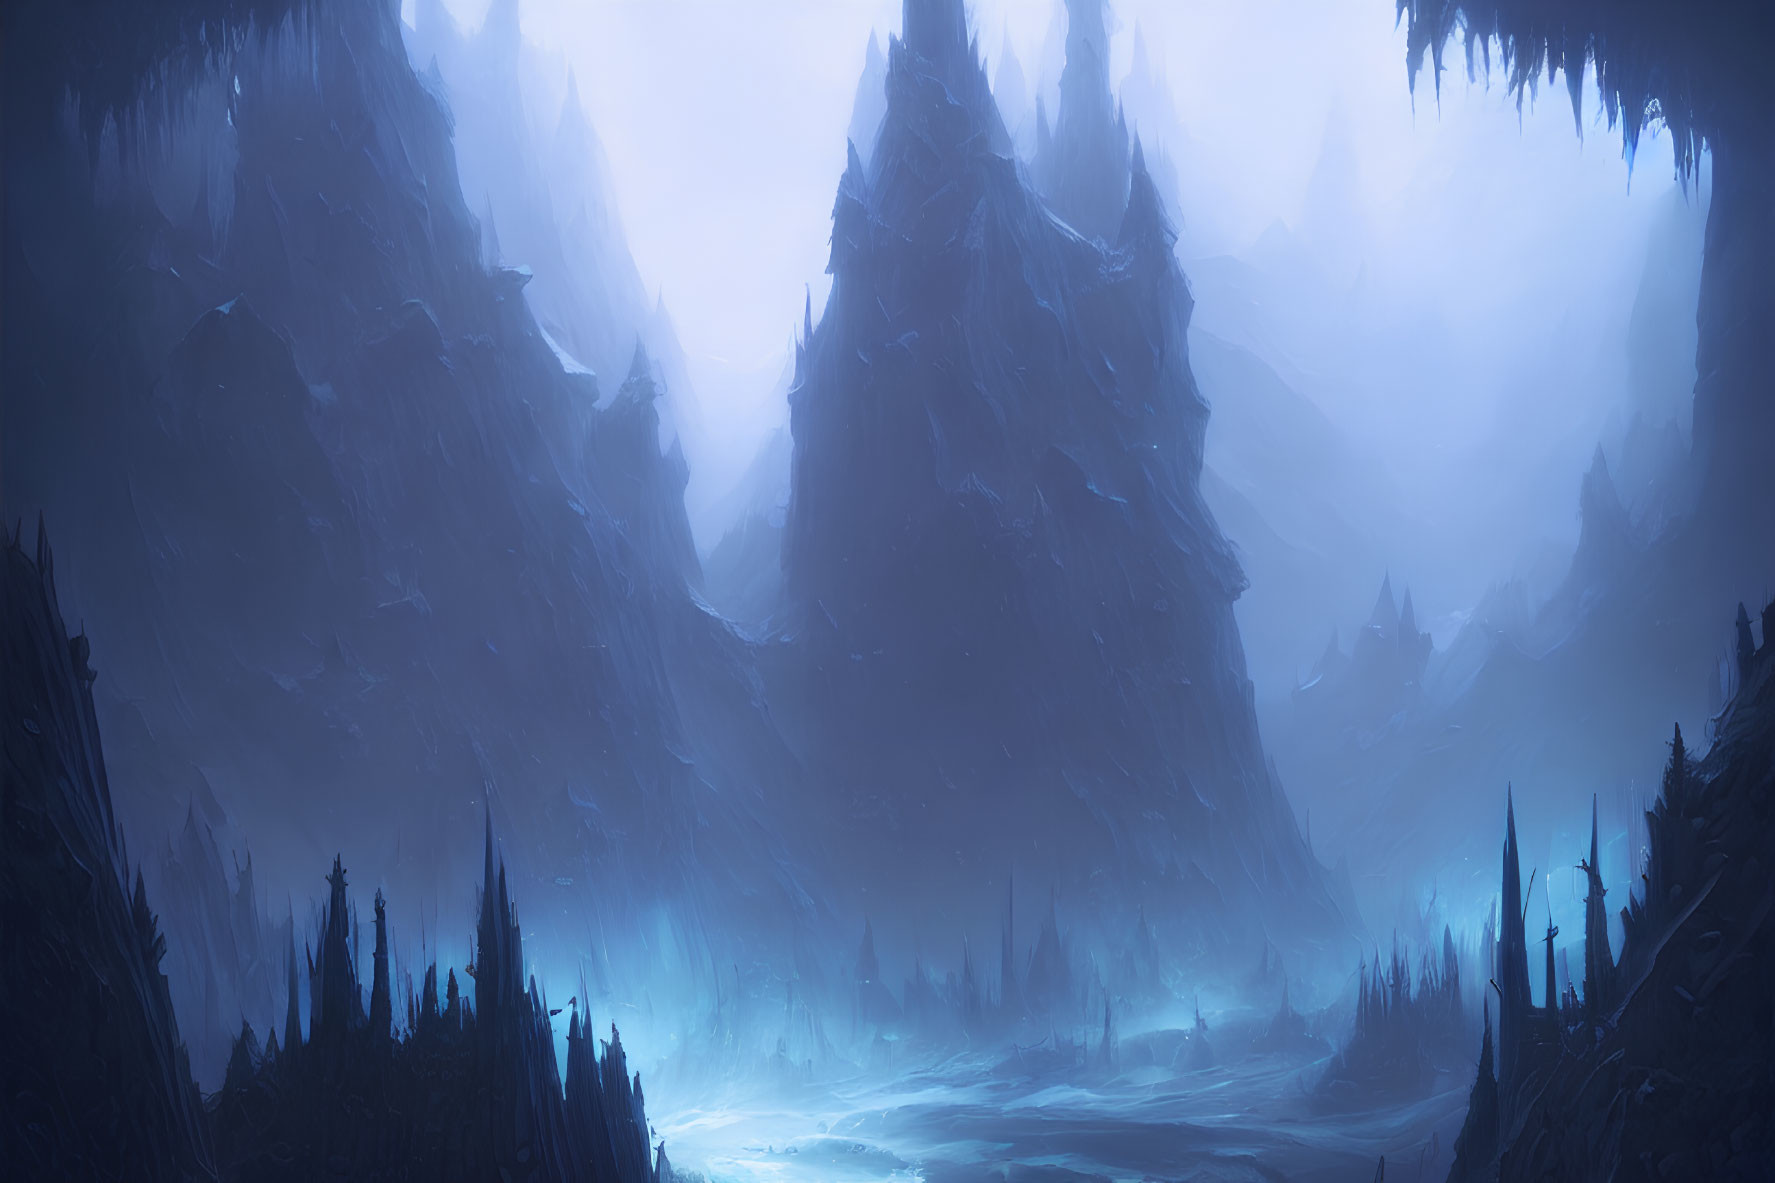 Mystical fog-enveloped landscape with spiky mountains and ethereal light